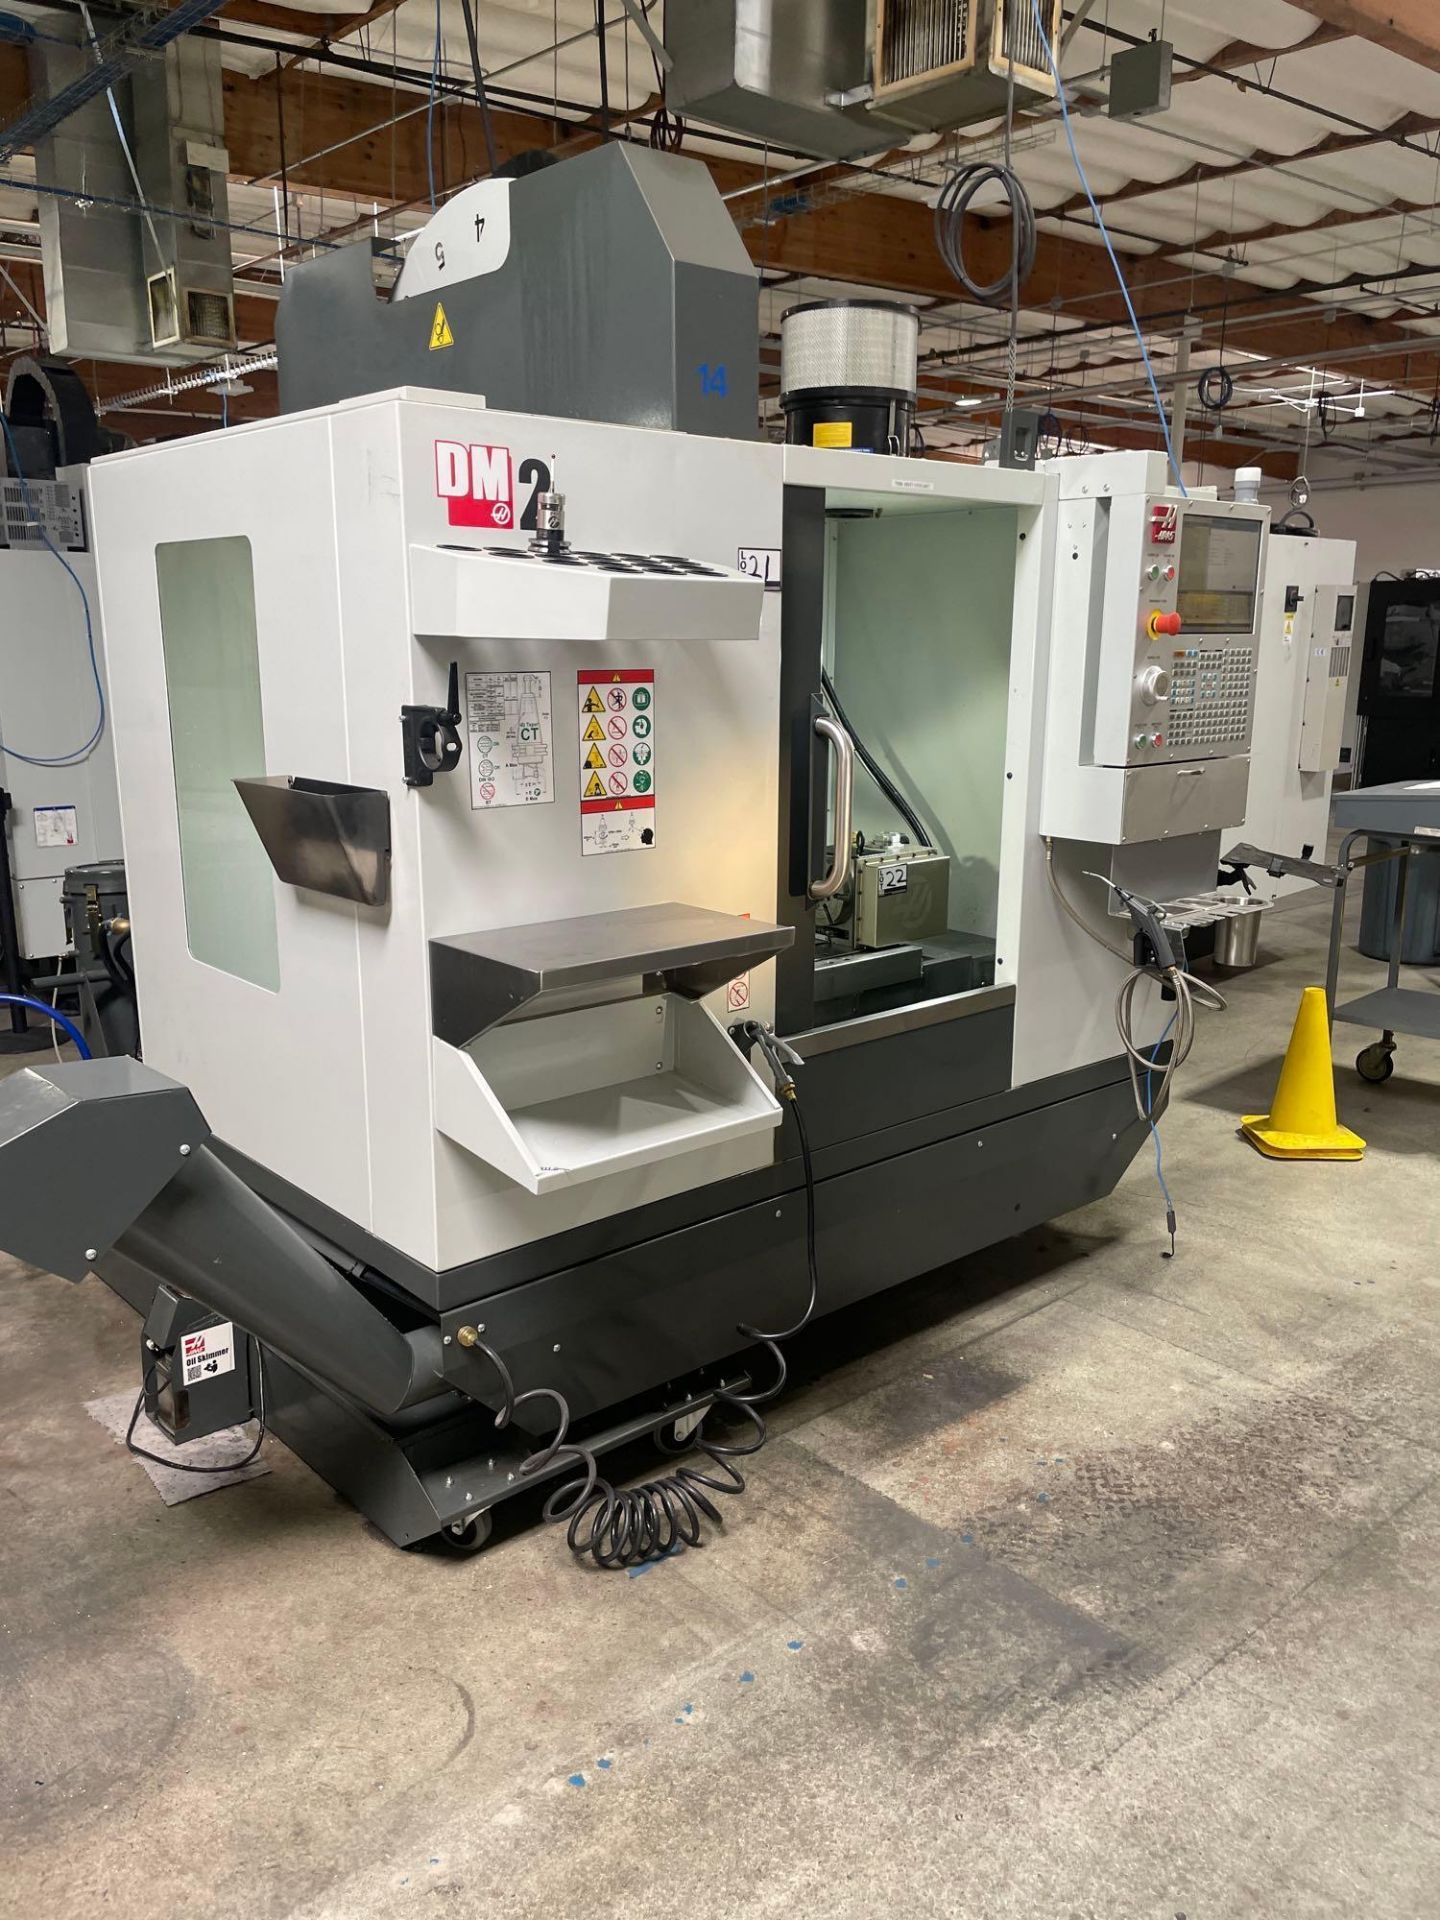 Haas DM-2, 28” x 16” x 15.5” Travels, CT 40, 18+1 SMTC, CTS, WIPS, as New as 2021 - Image 4 of 14